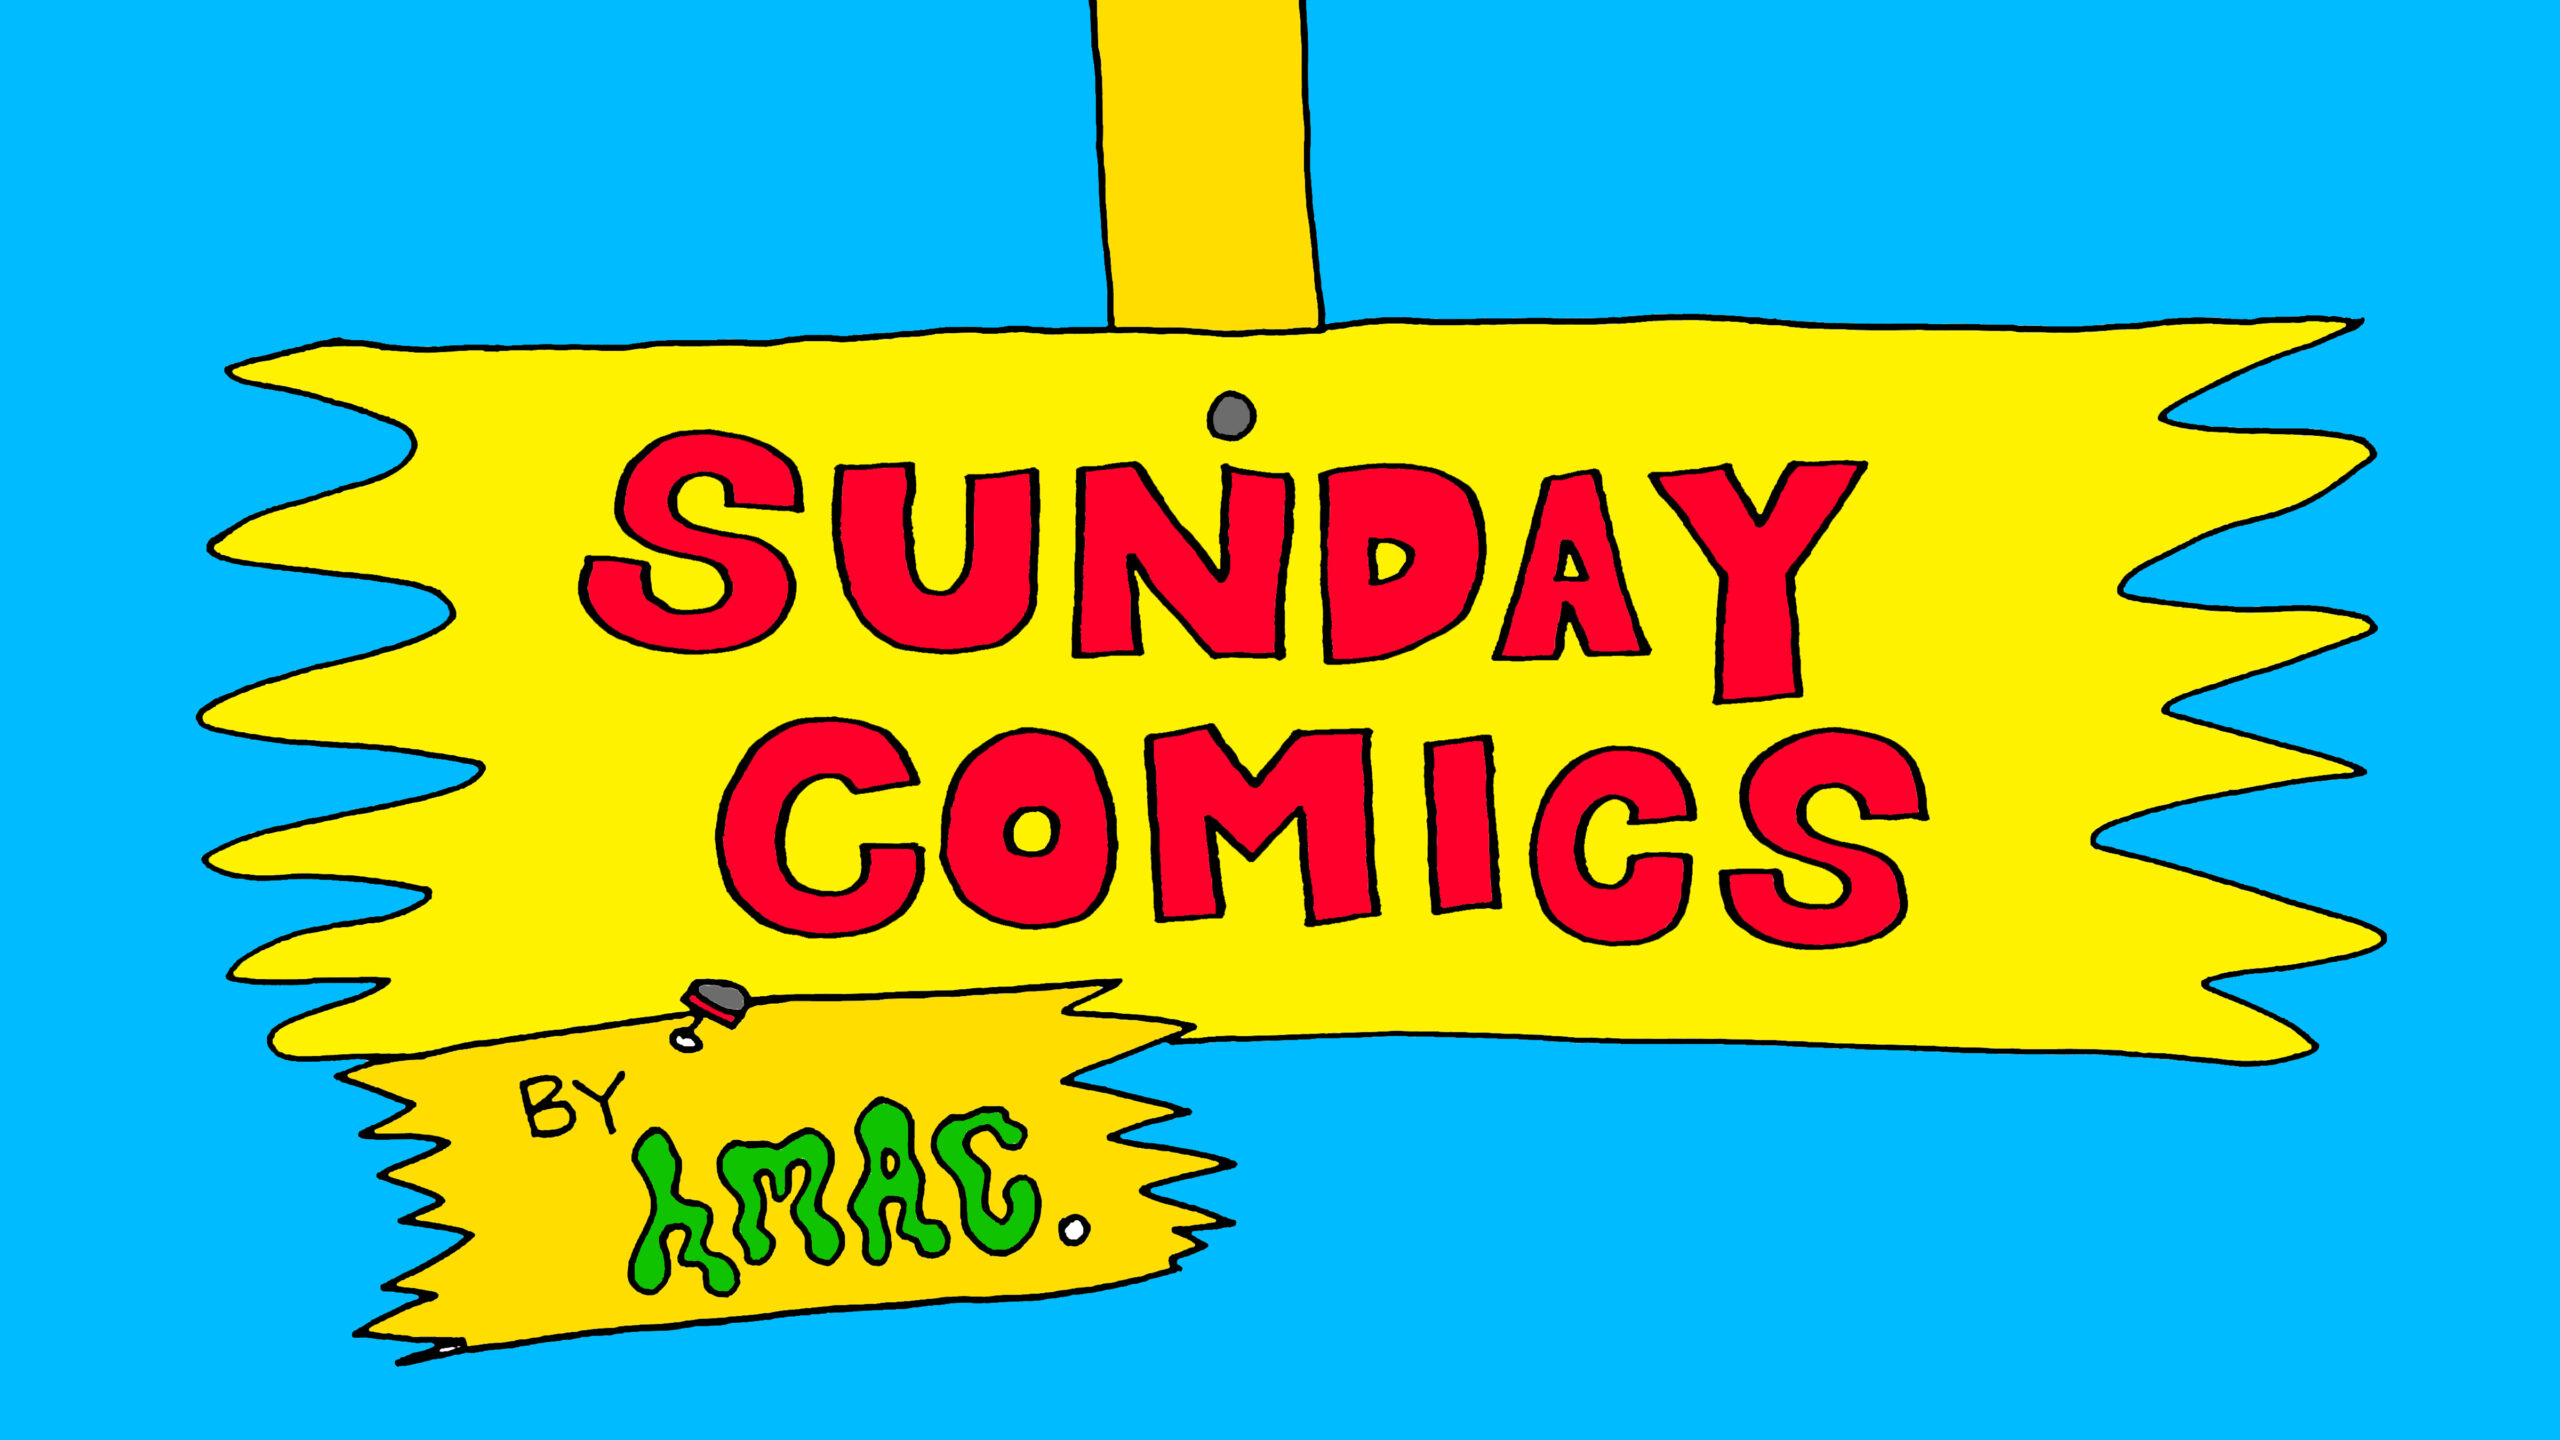 Yellow banner in a a blue background. that reads "Sunday Comics" in red, with a smaller banner underneath that read "by HMAC""